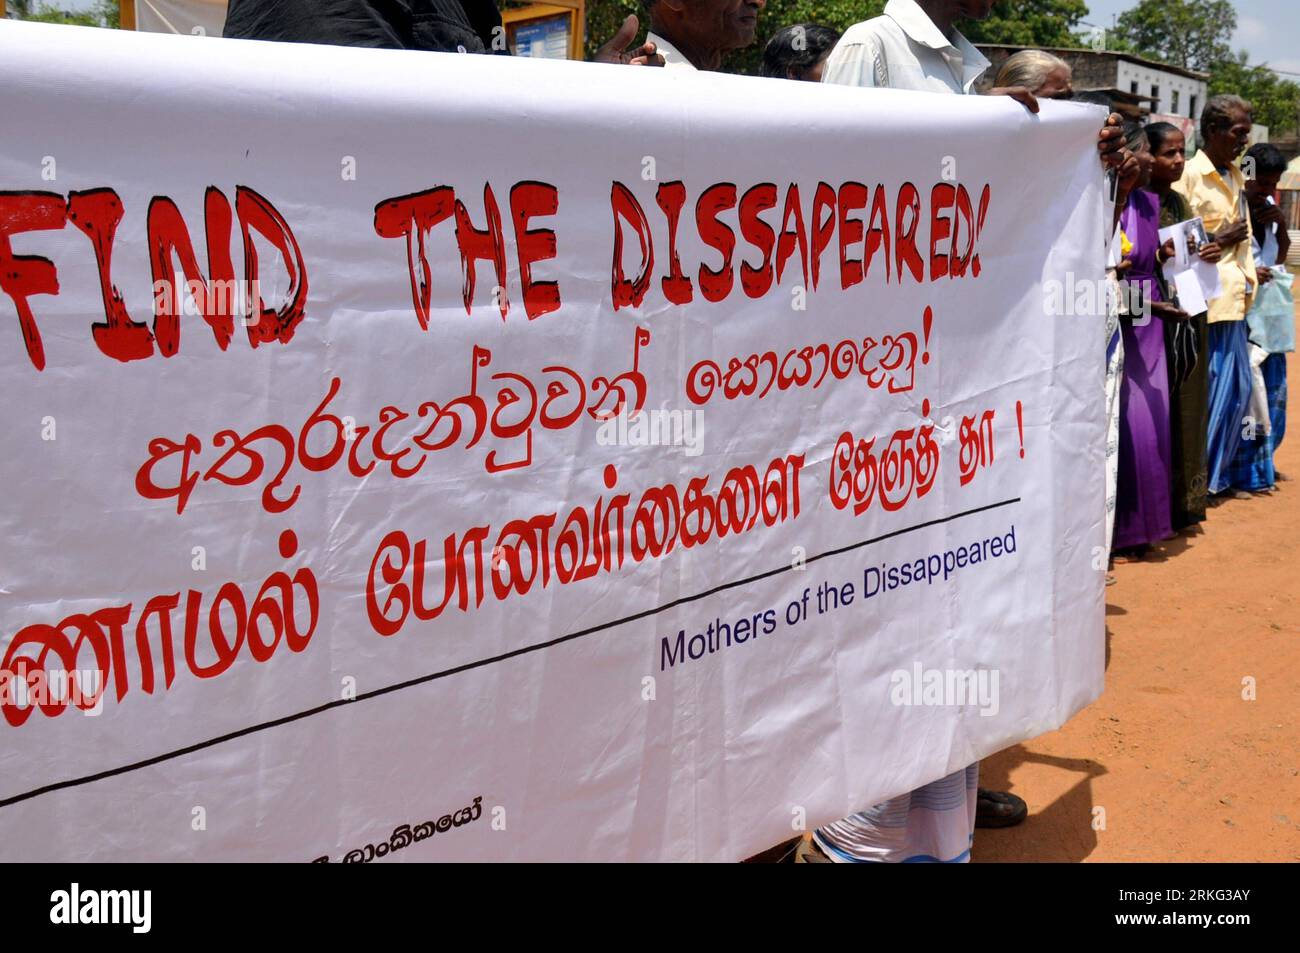 Bildnummer: 55540655  Datum: 23.06.2011  Copyright: imago/Xinhua (110623) -- KILINOCHCHI, June 23, 2011 (Xinhua) -- Parents of missing Tamil youth staged a protest in Kilinochchi, once the de facto capital of the Tamil Tiger rebel, urging the authorities to release information of their children, on June 23, 2011. Sri Lanka s longstanding civil war ended two years ago with the defeat of the Tamil Tigers. (Xinhua/Gayan Sameera) (srb) SRI LANKA-PARENTS OF MISSING YOUTH-PROTEST PUBLICATIONxNOTxINxCHN Gesellschaft xsk 2011 quer o0 Demo Protest Mutter Mütter Vermisste Tamilen    Bildnummer 55540655 Stock Photo